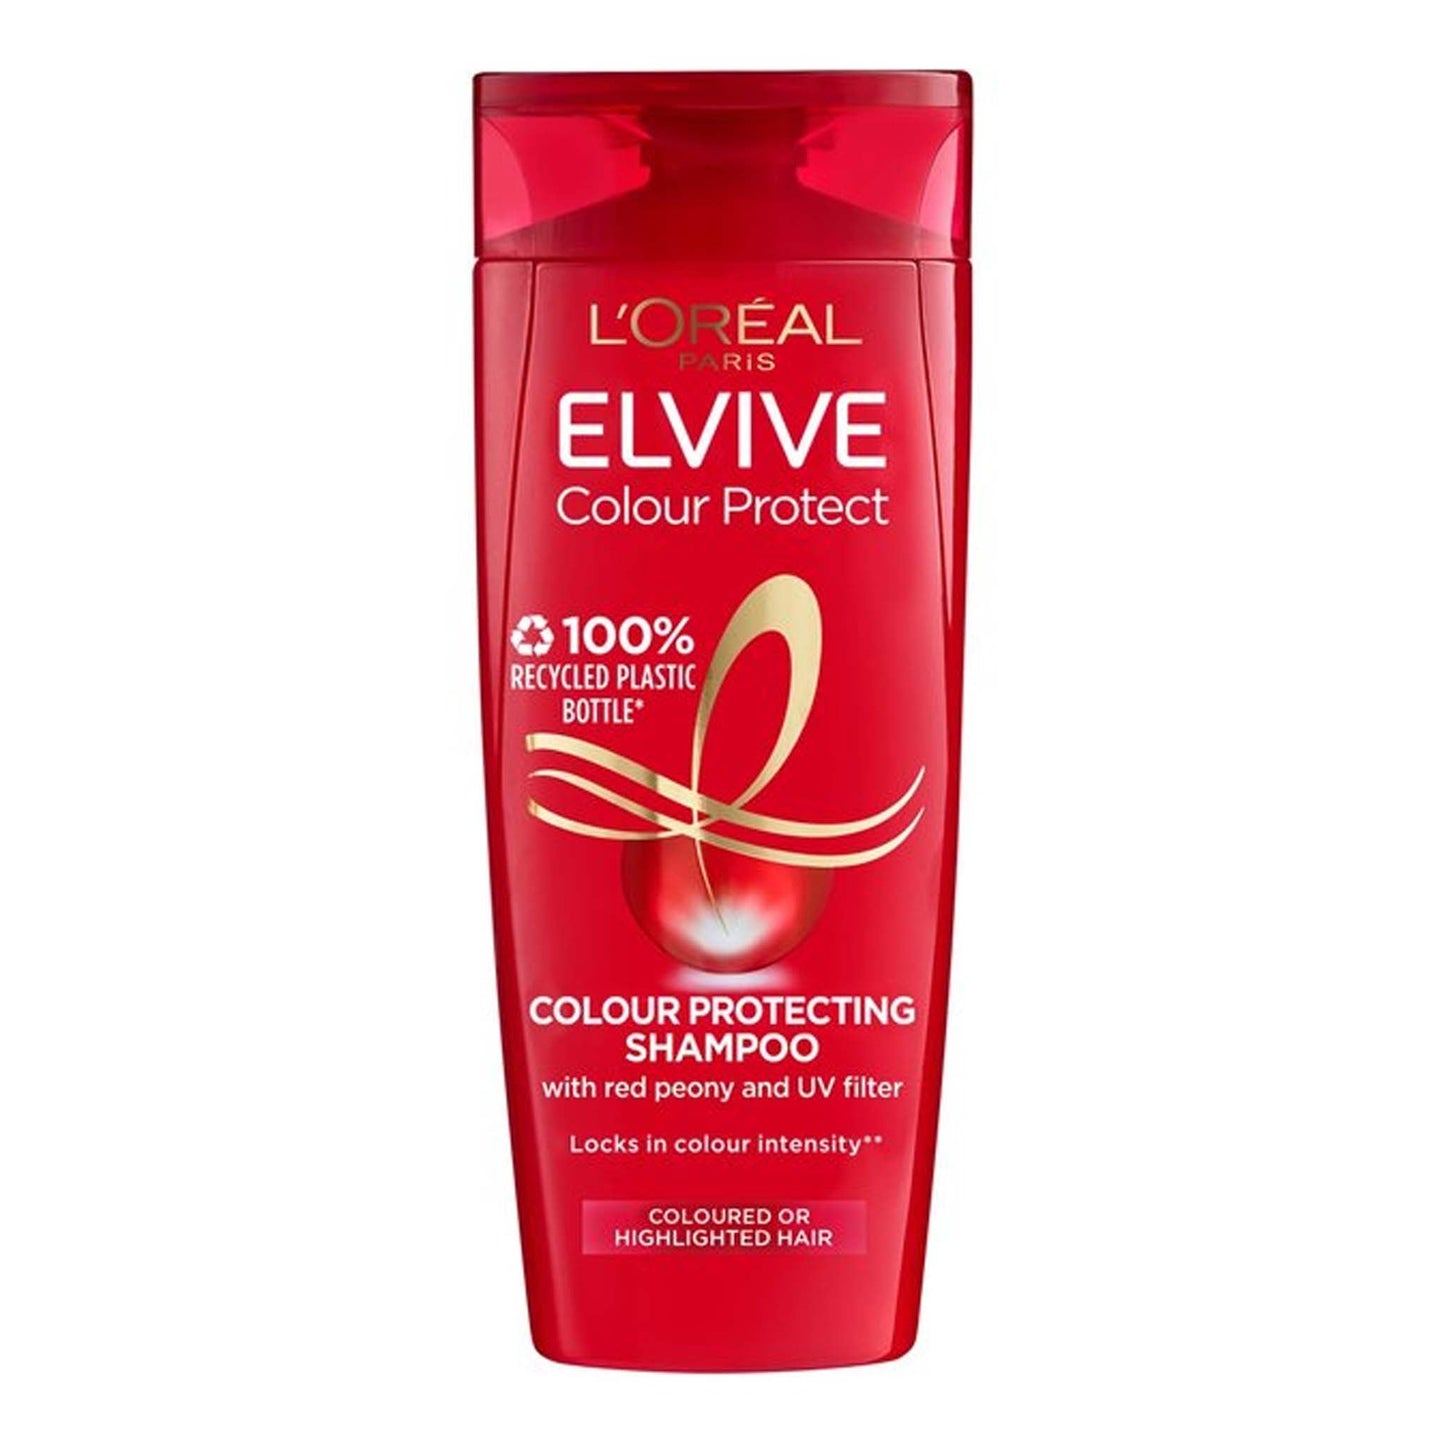 L'OREAL PARIS - ELVIVE COLOUR PROTECT COLOUR PROTECTING SHAMPOO WITH UV FILTER & RED PEONY - 400ML